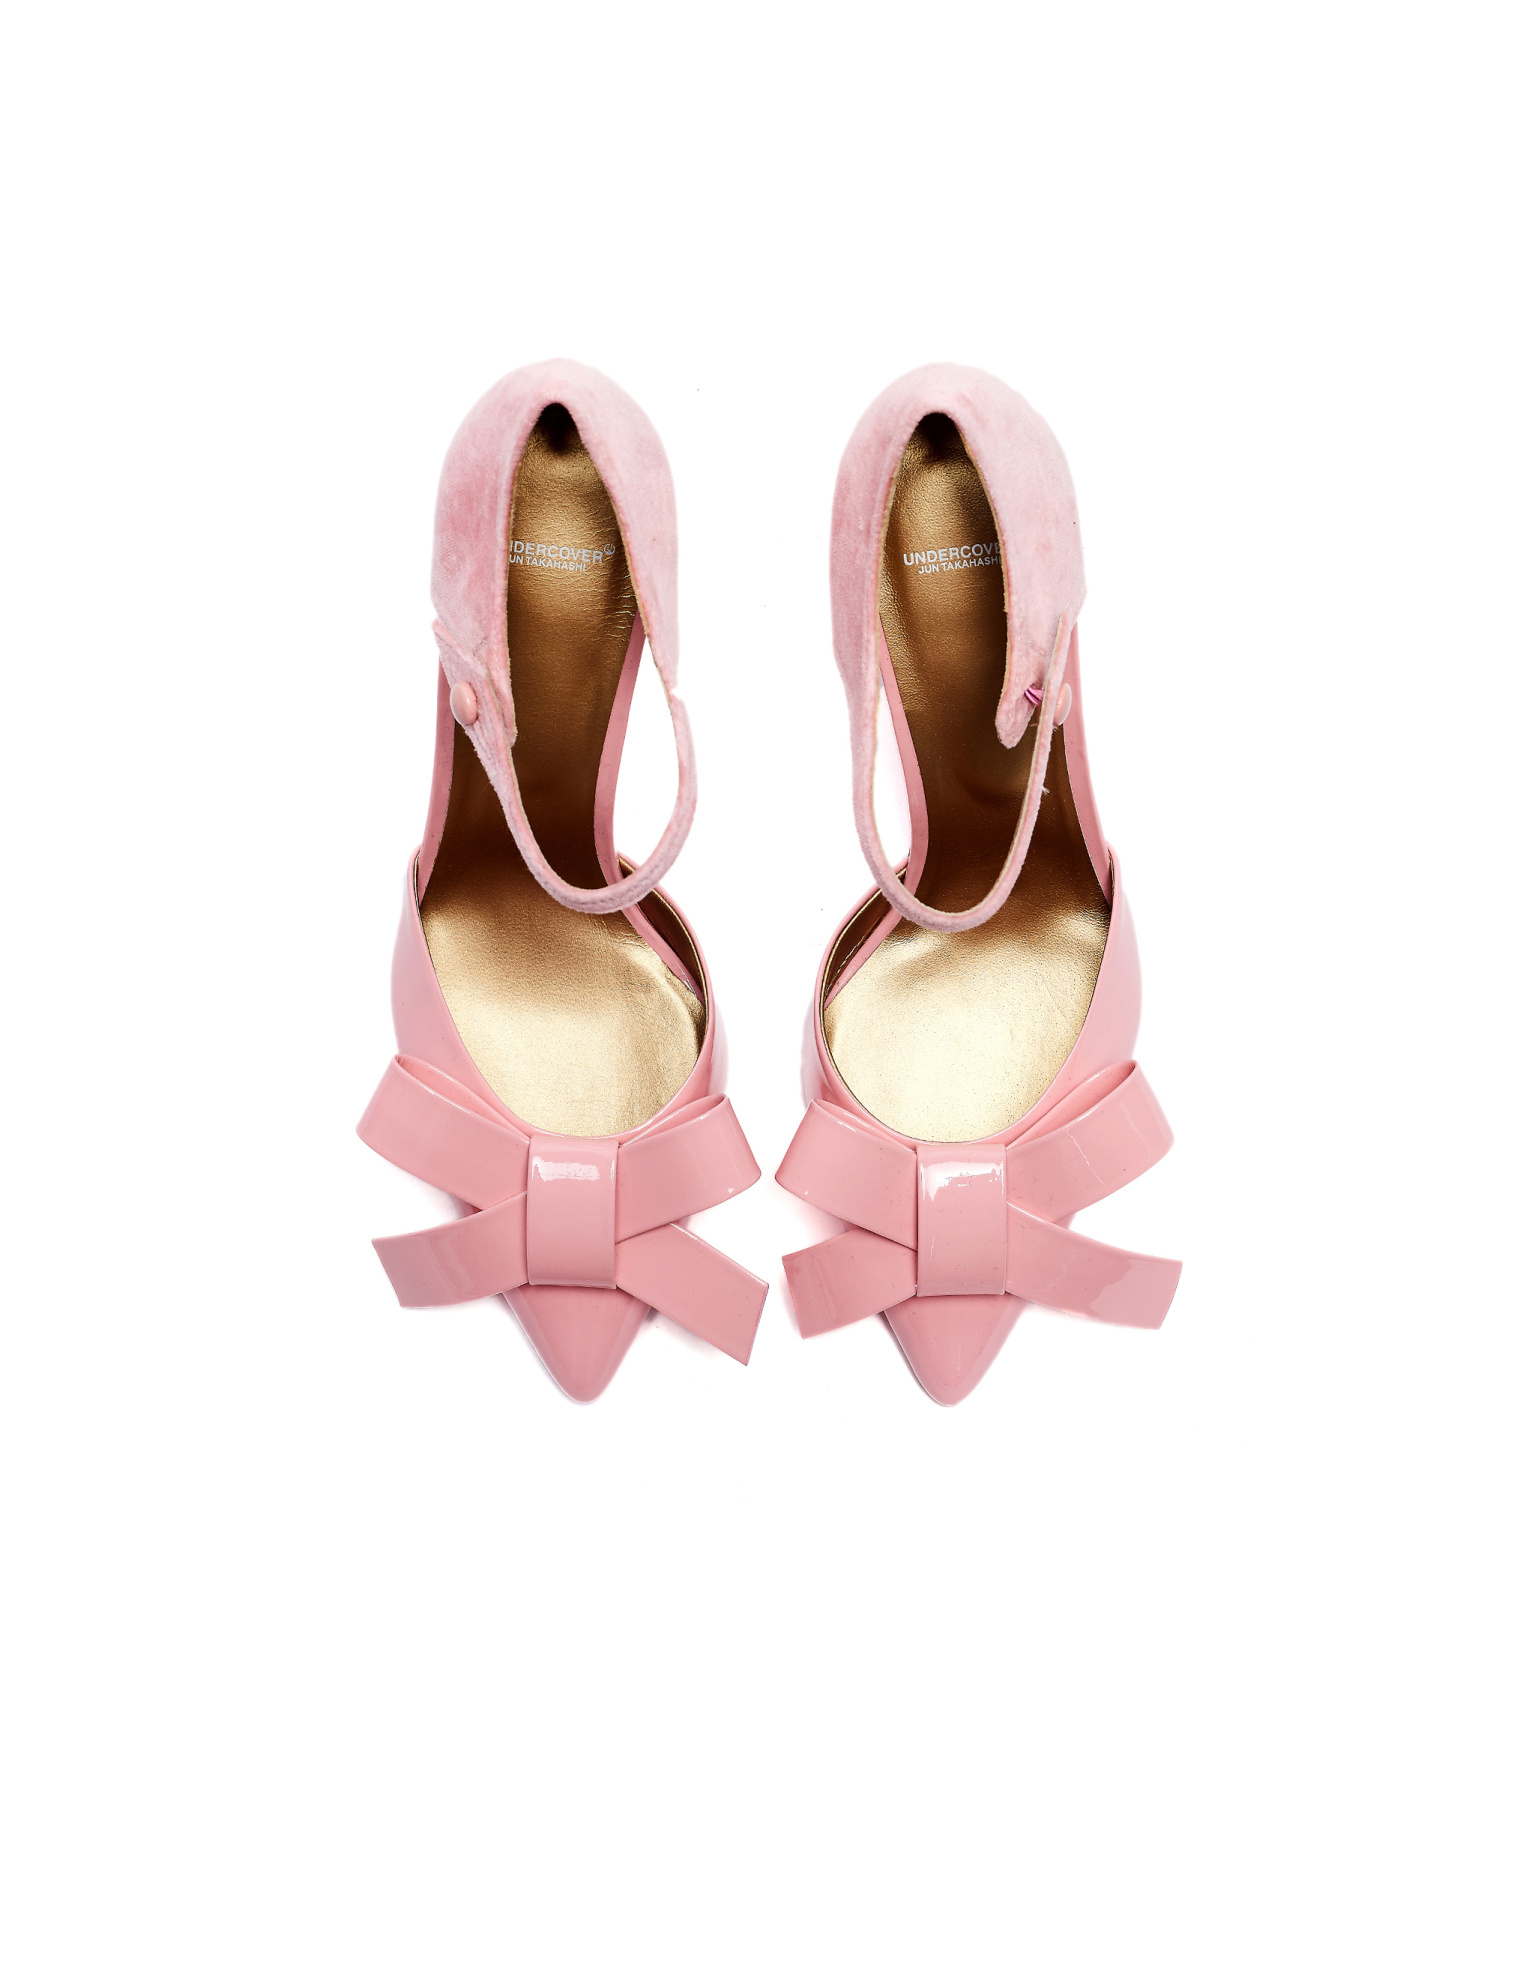 Undercover Pink Leather Bow Pumps